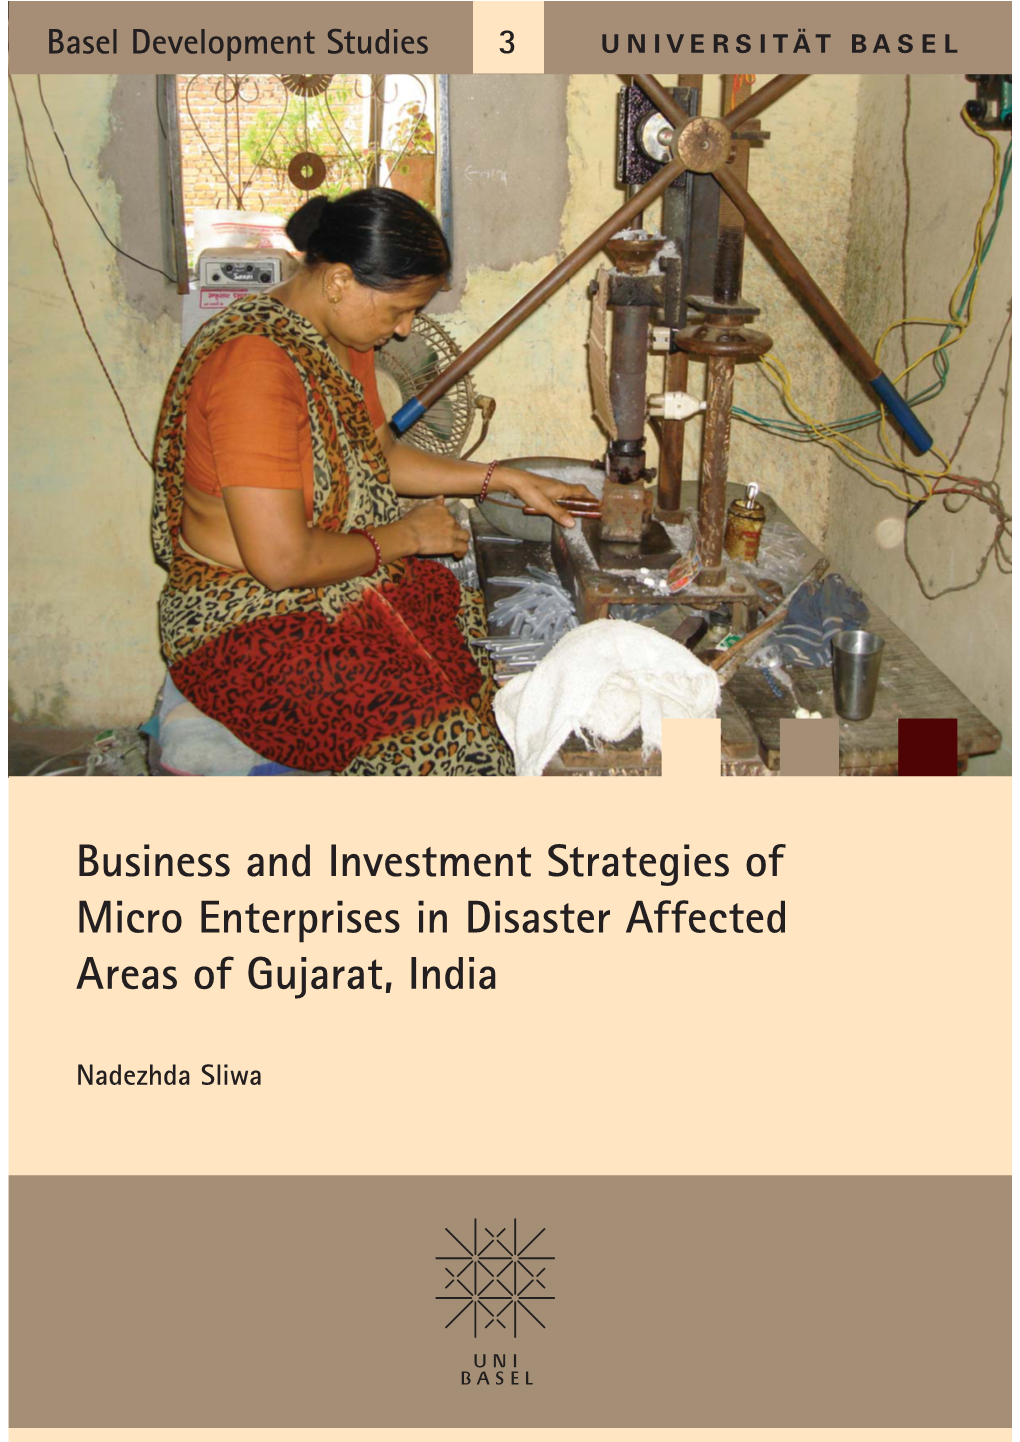 Business and Investment Strategies of Micro Enterprises in Disaster Affected Areas of Gujarat, India